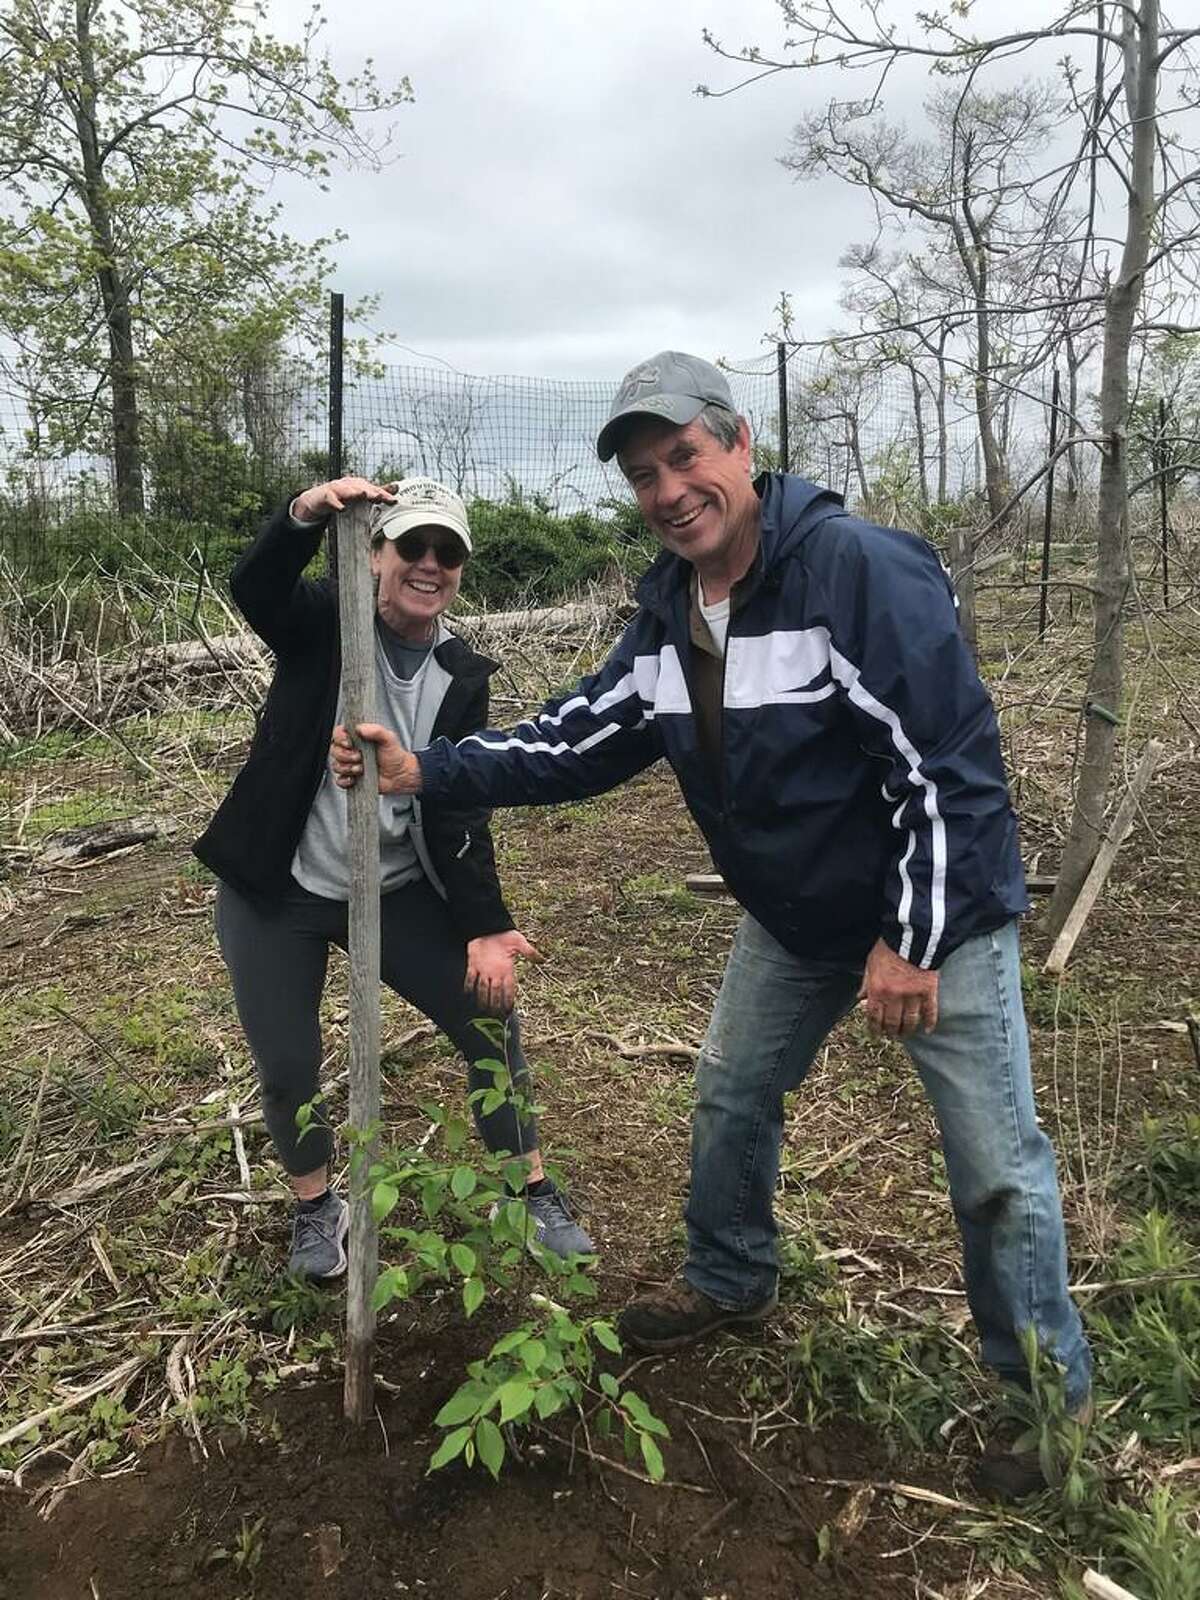 Mary Kay Dupont (left) and Bill Pursell plant a native black cherry tree on Charles Island.